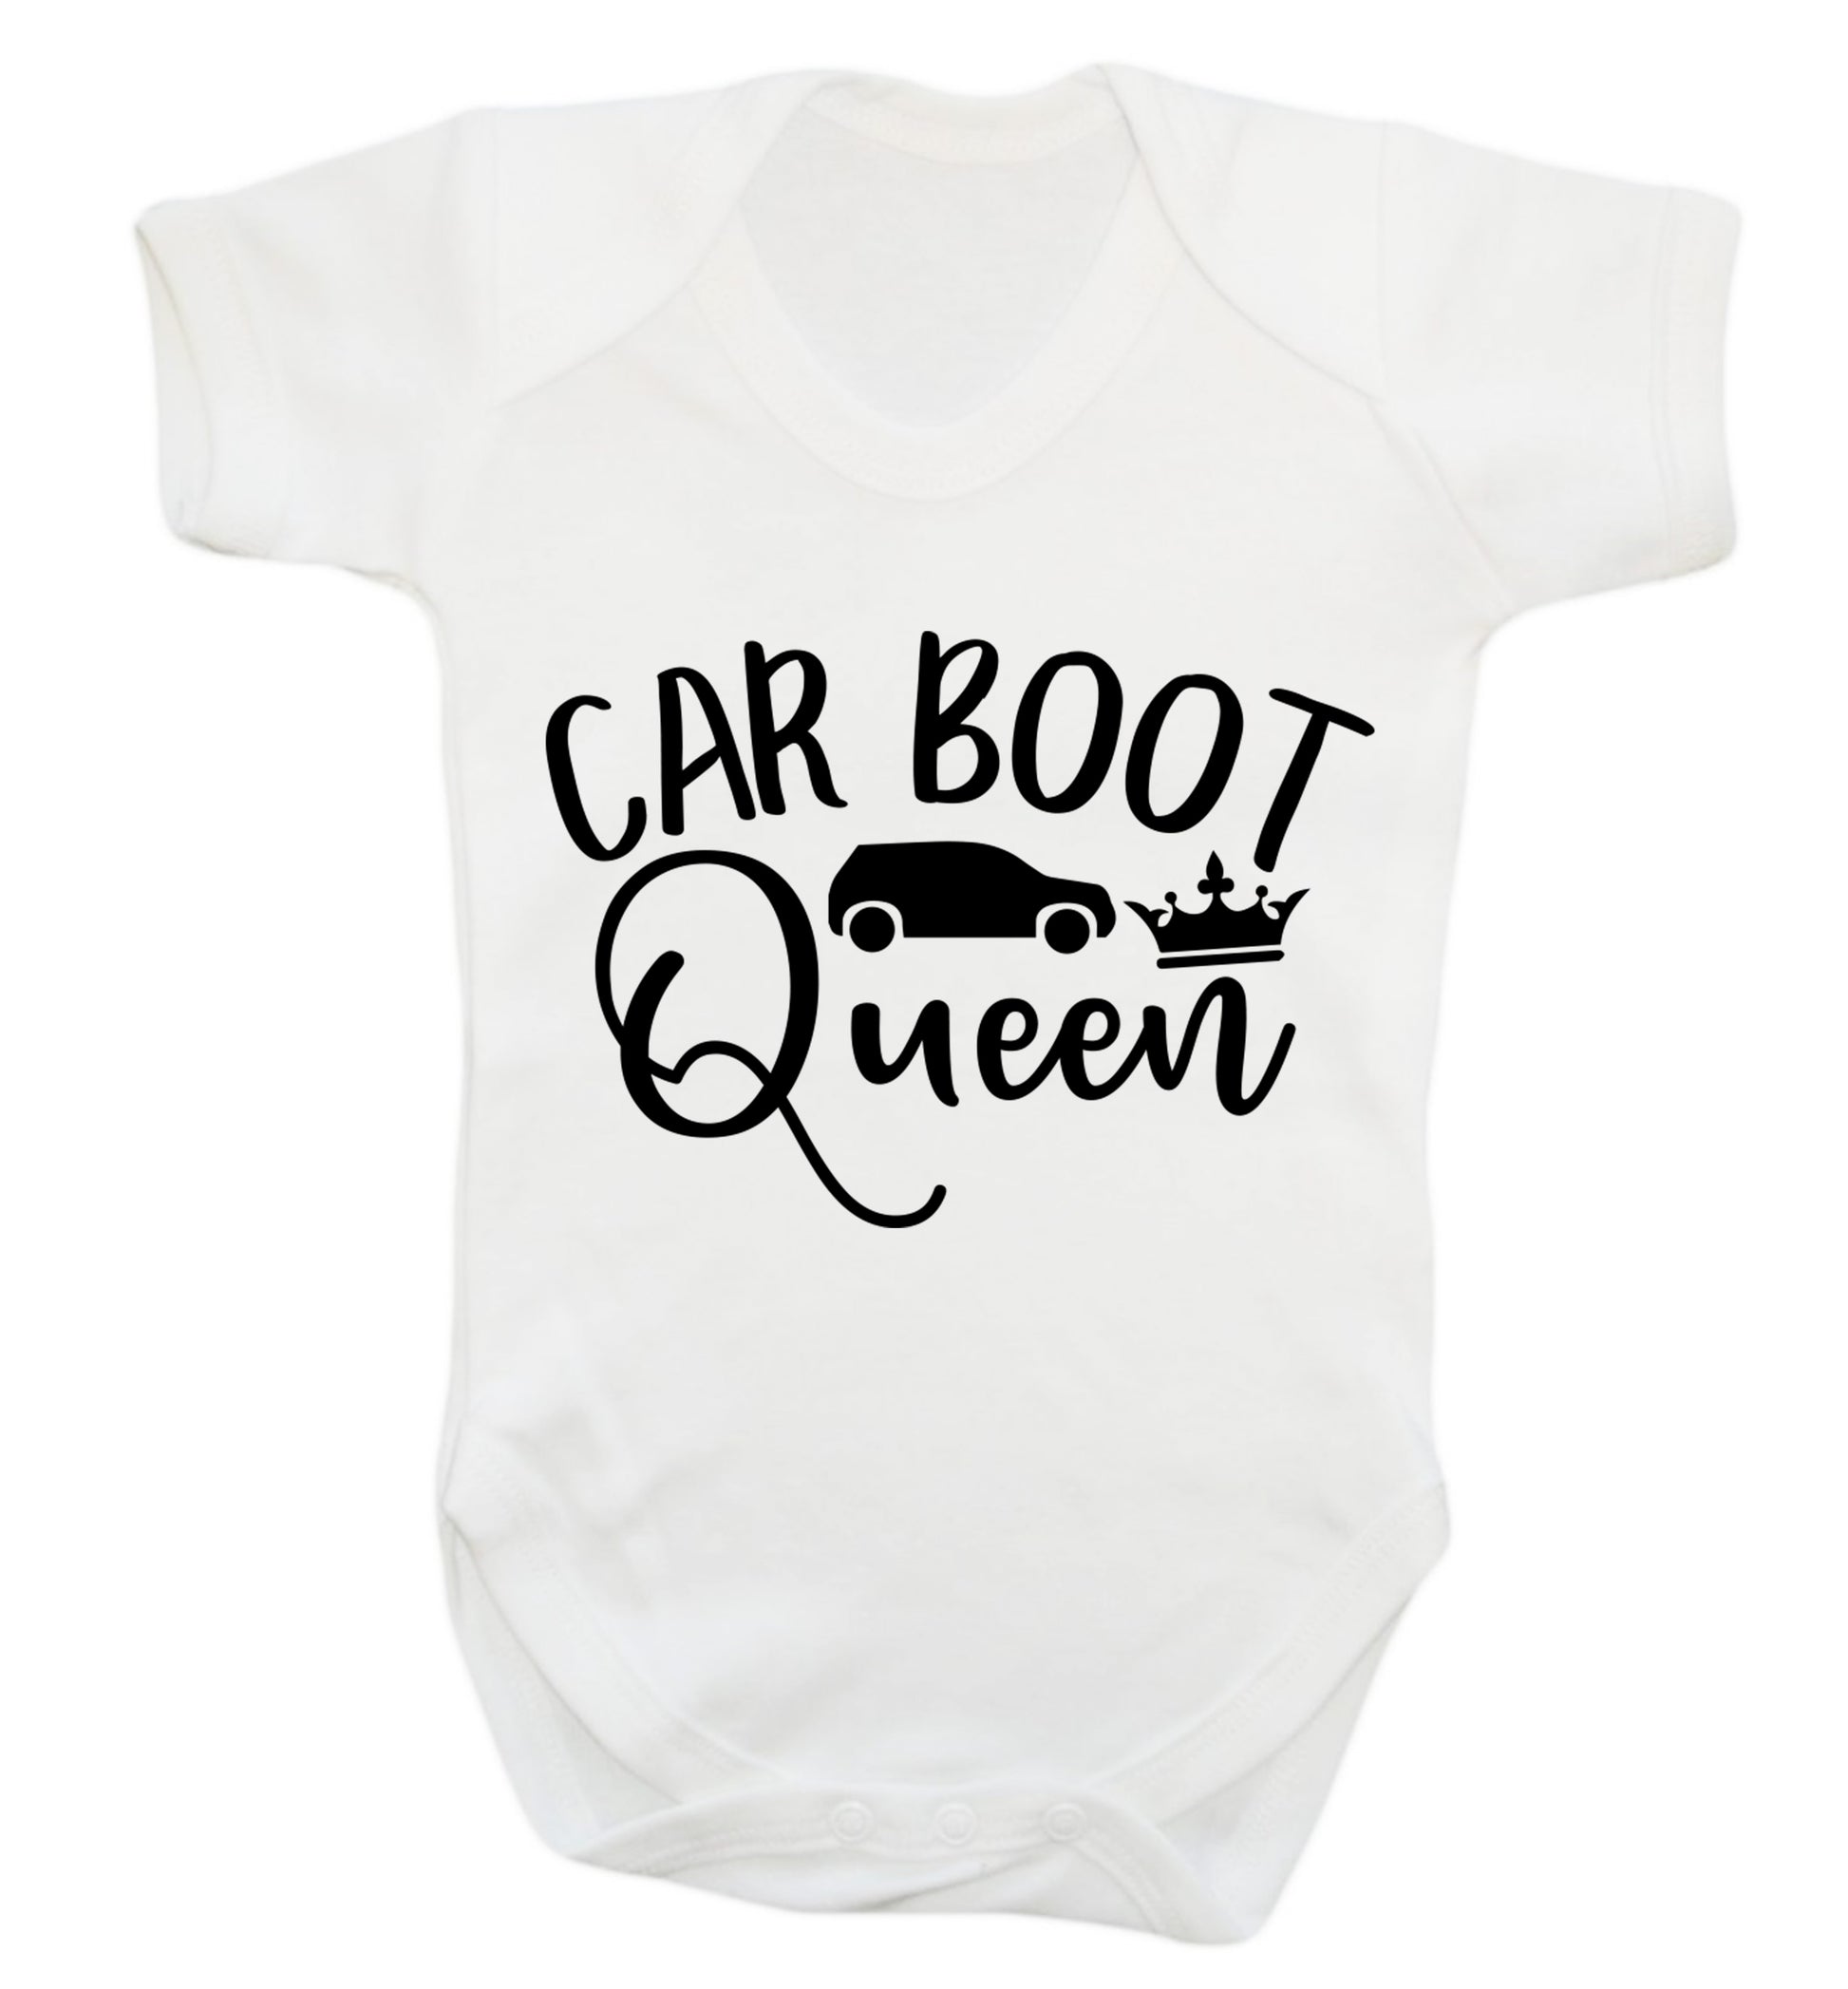 Carboot Queen Baby Vest white 18-24 months